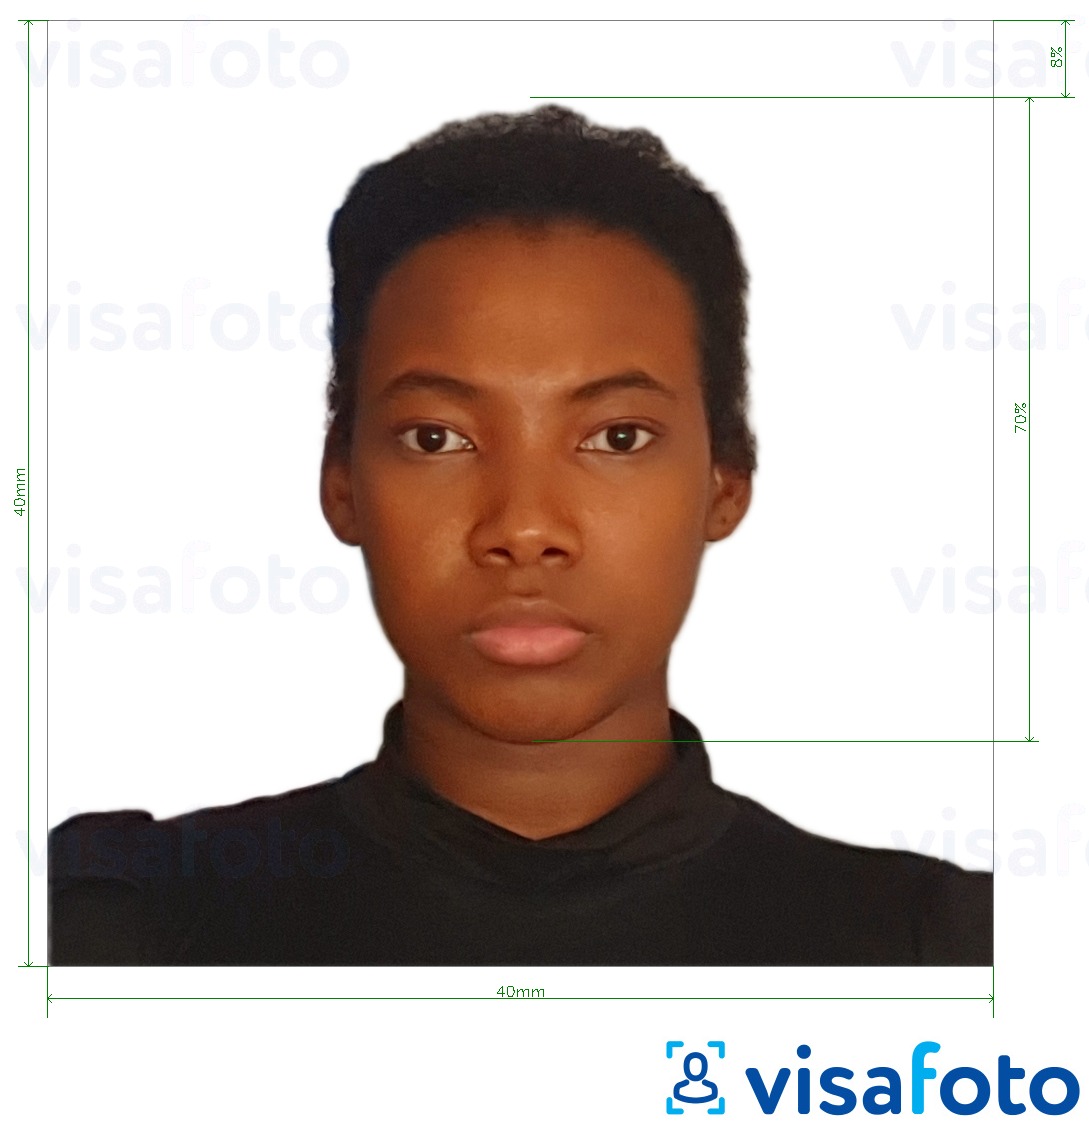 Example of photo for Madagascar ID card 40x40 mm with exact size specification